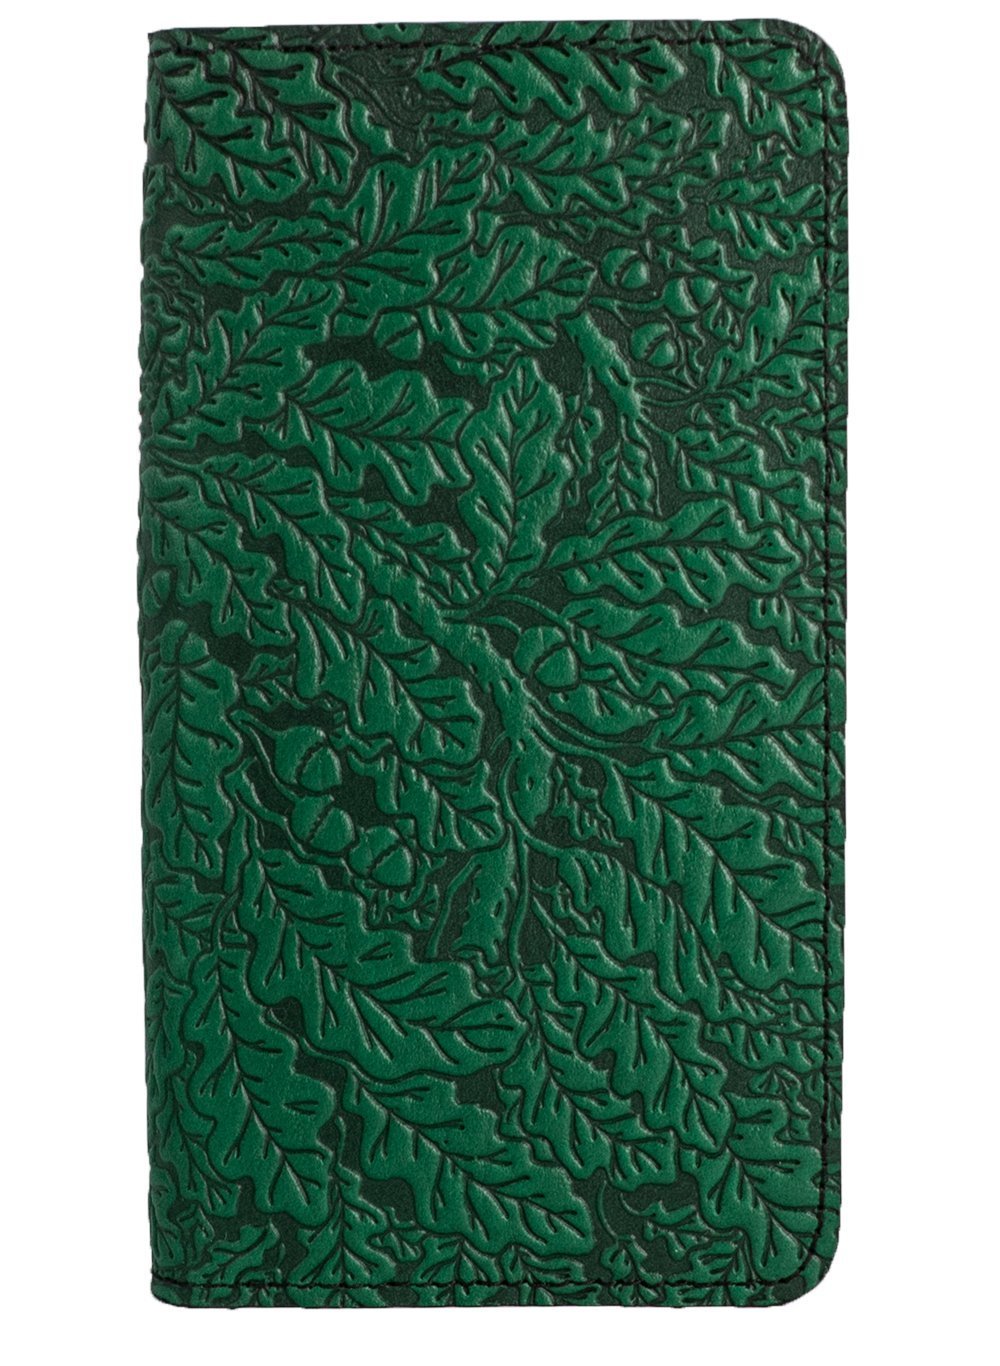 ecolemamie Small ecolemamie Small Leather Smartphone Wallet Case, Oak Leaves in Green